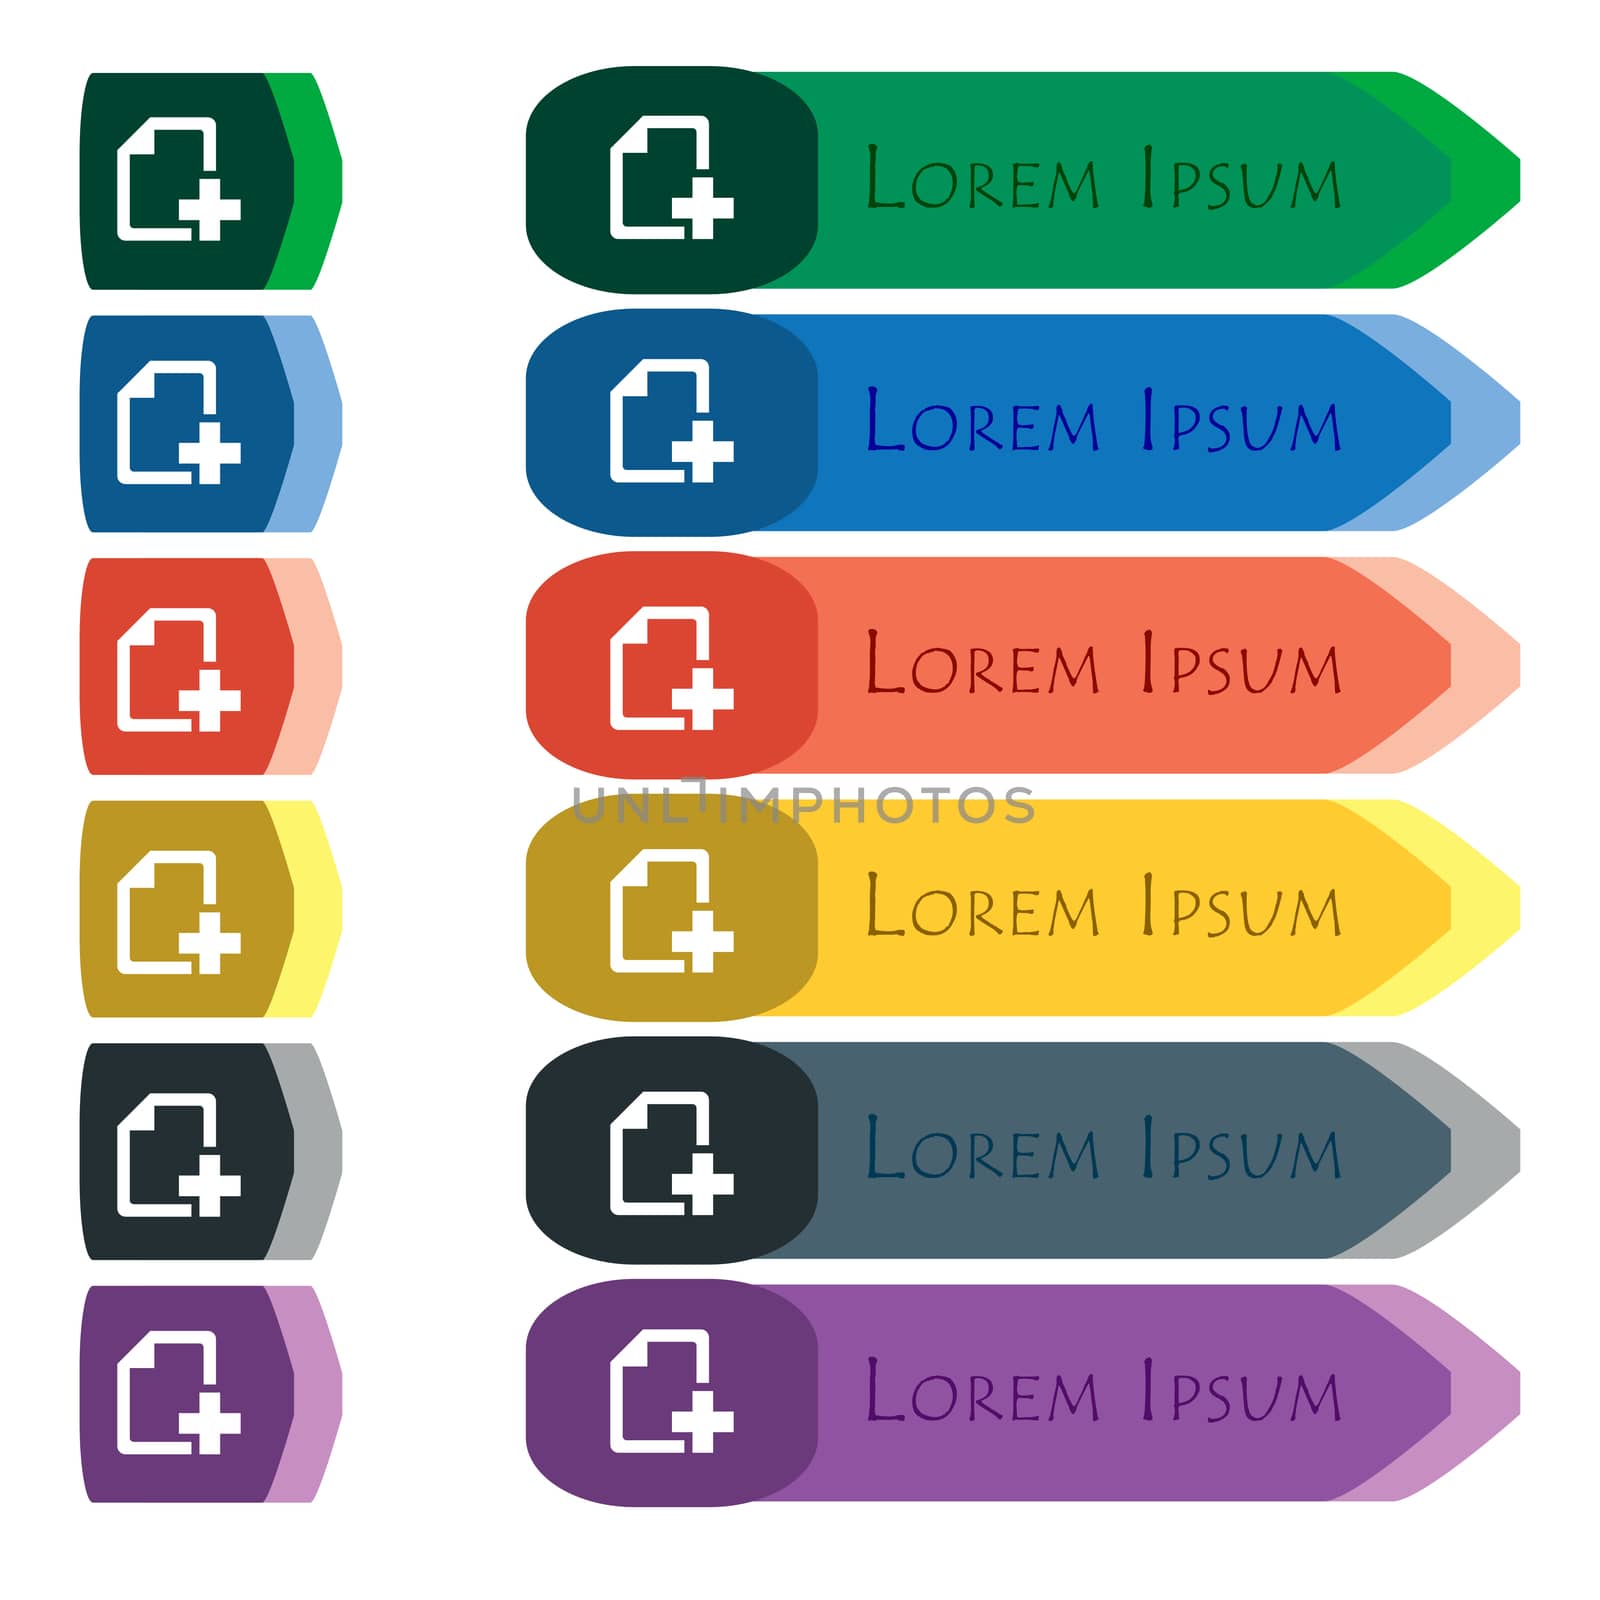 Add File document icon sign. Set of colorful, bright long buttons with additional small modules. Flat design. 